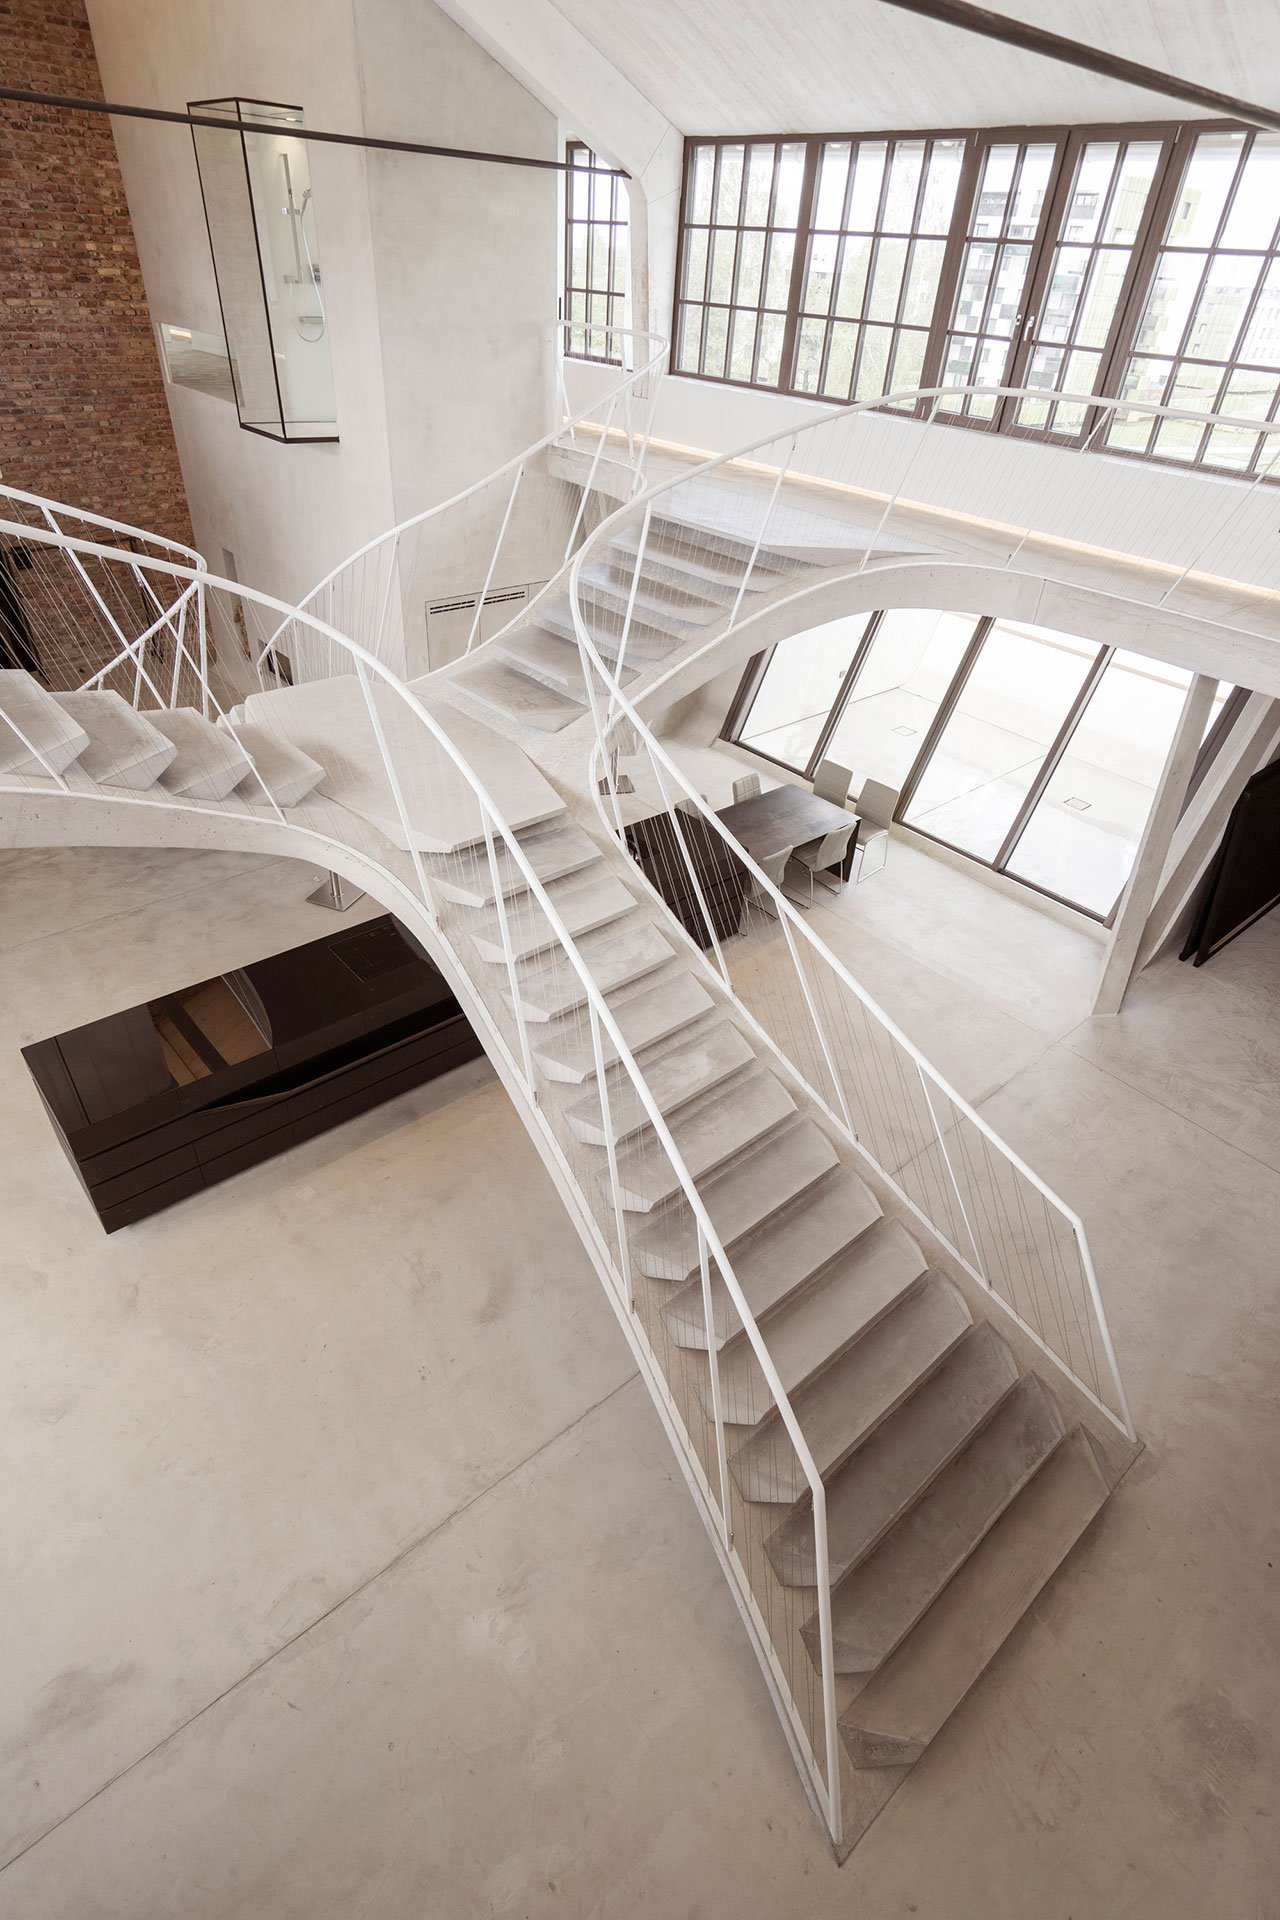 One of the giant staircases inside the newly converted Loft Panzerhalle.